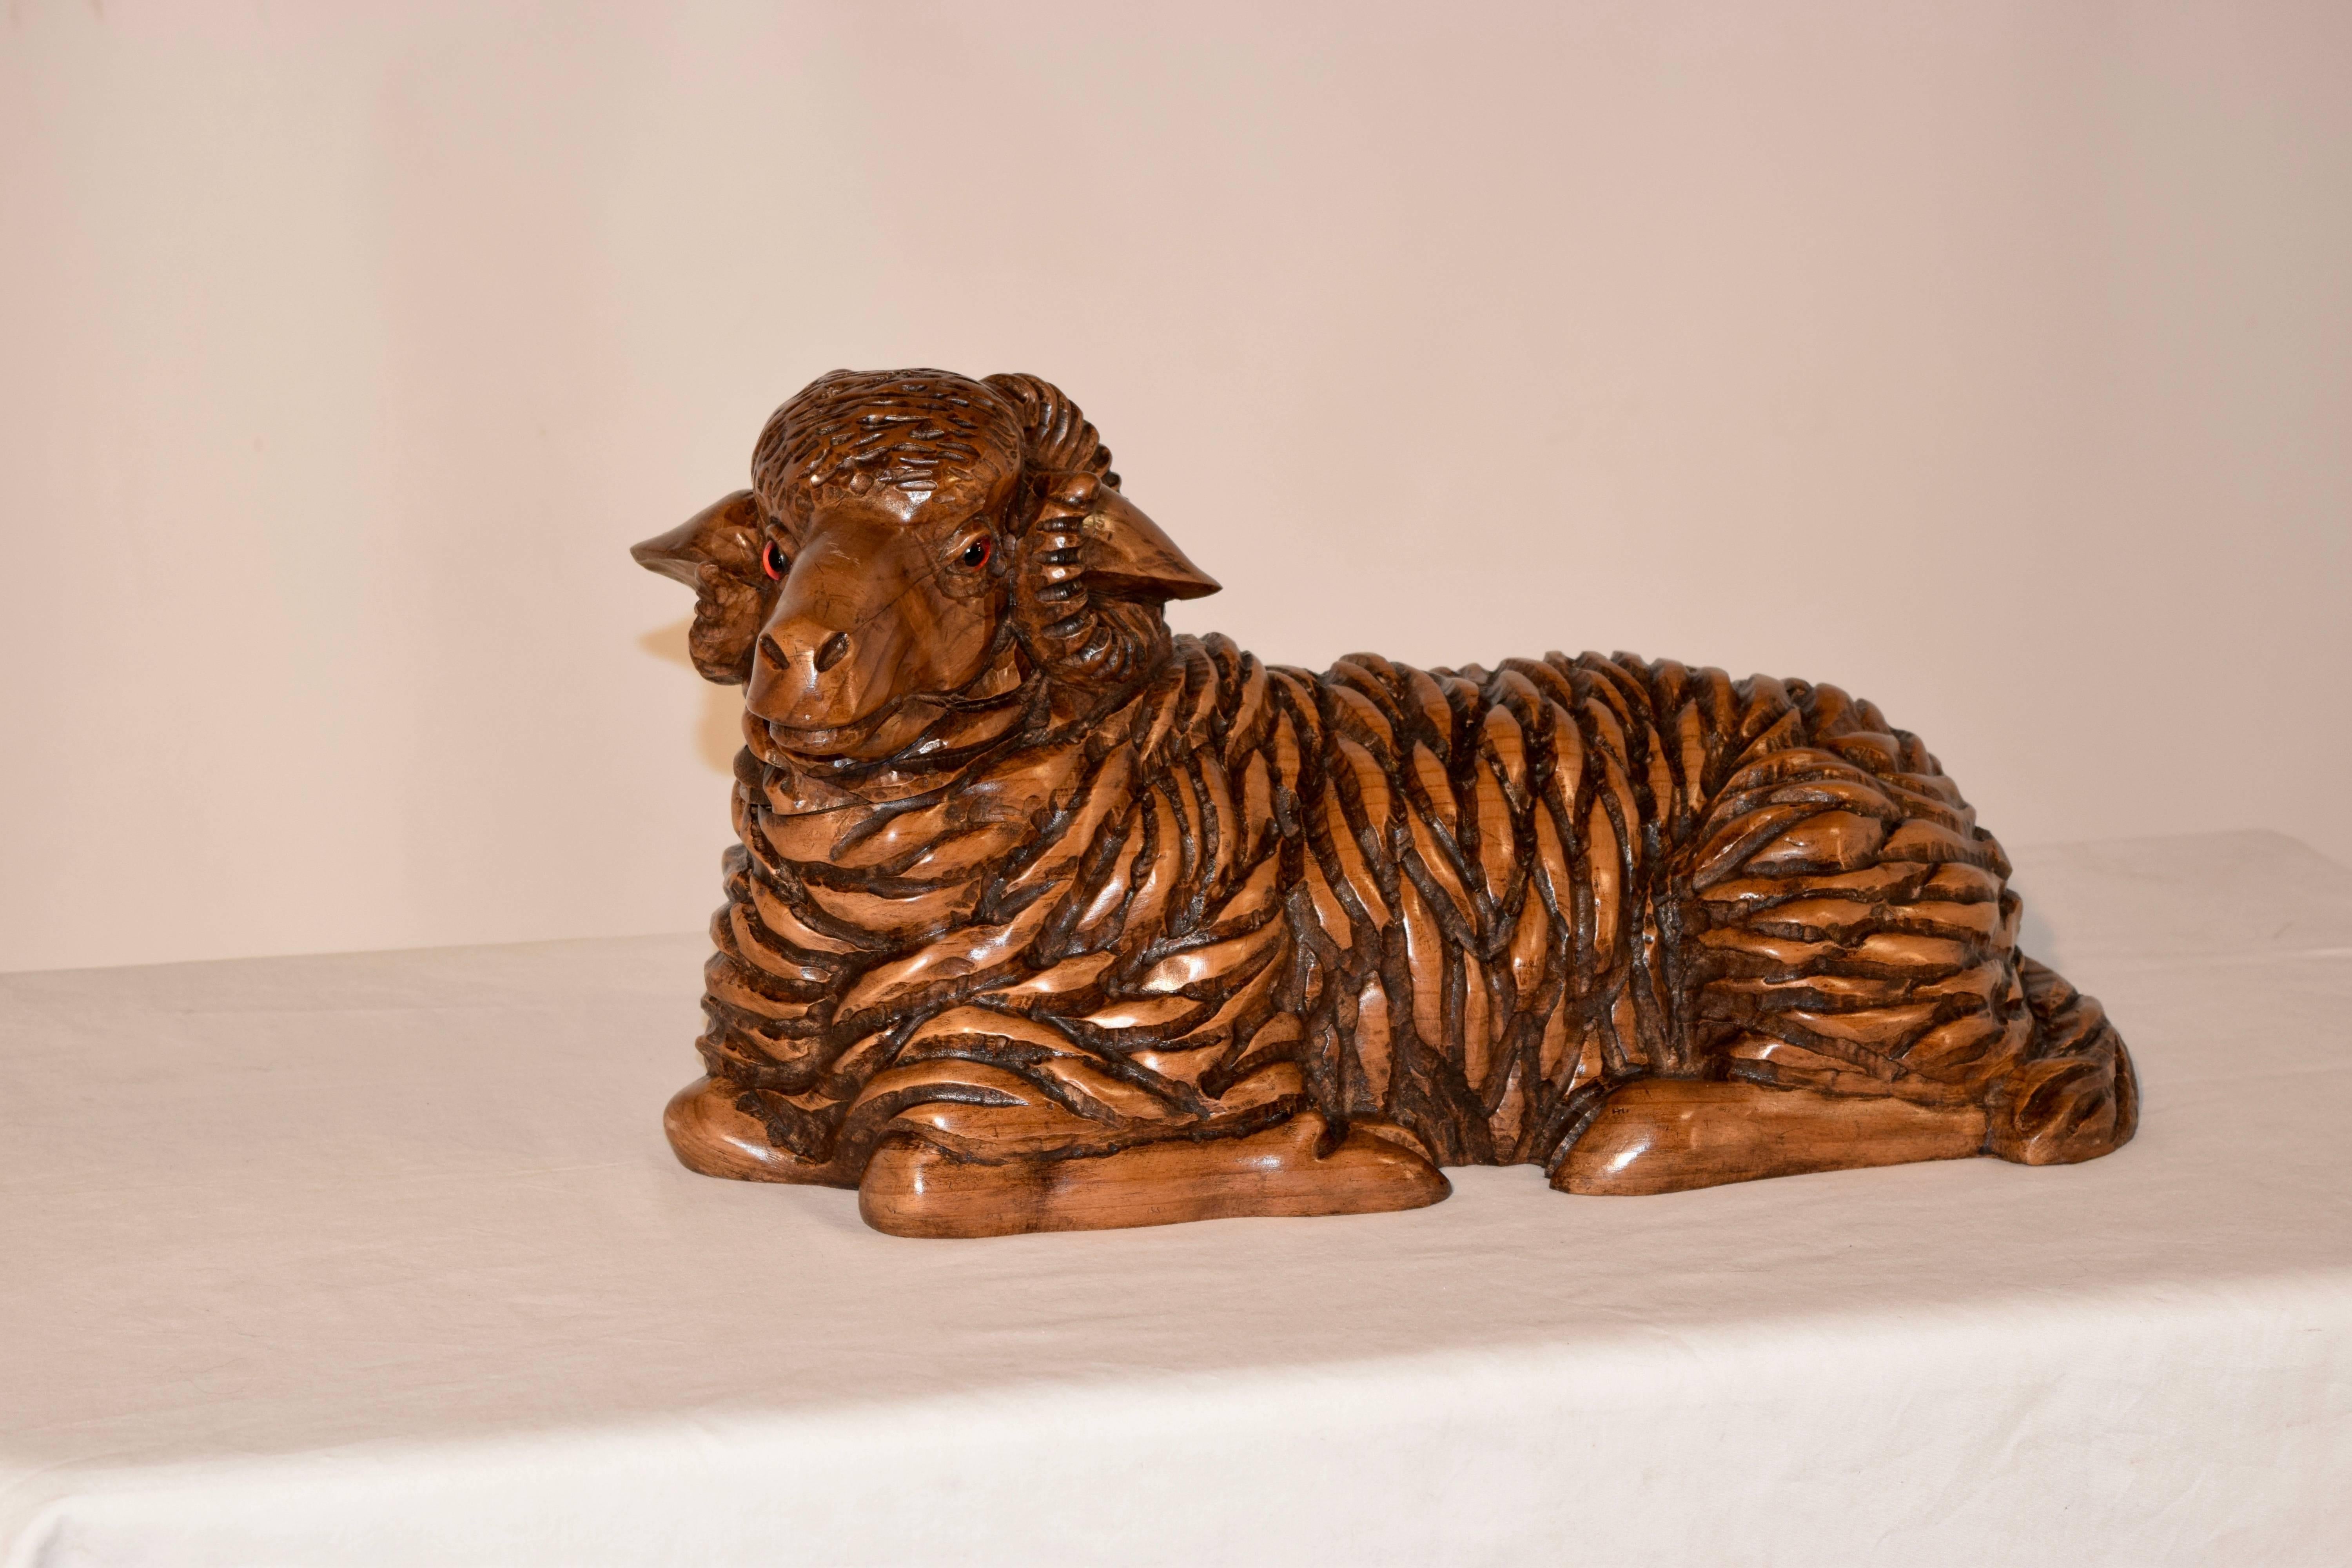 19th century fruitwood figure of a sheep which has been meticulously hand carved. Glass eyes. The sheep is in a resting pose.